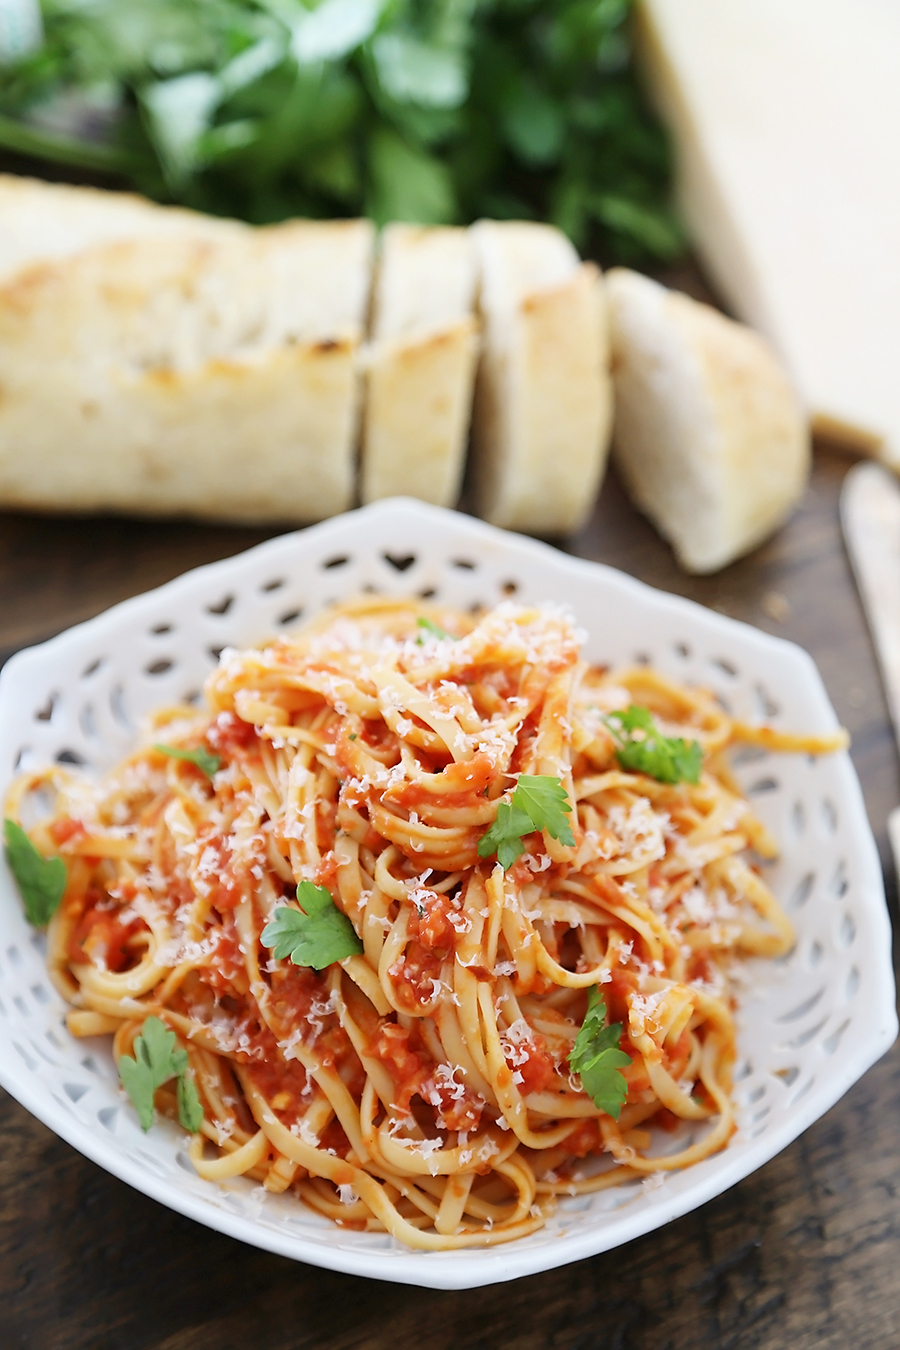 5-Ingredient Butter Roasted Tomato Sauce with Linguine - One of the most delicious, easy tomato + butter pasta sauces ever! Toss with hot cooked pasta and top with fresh Parmesan. So simple and scrumptious for weeknights! Thecomfortofcooking.com